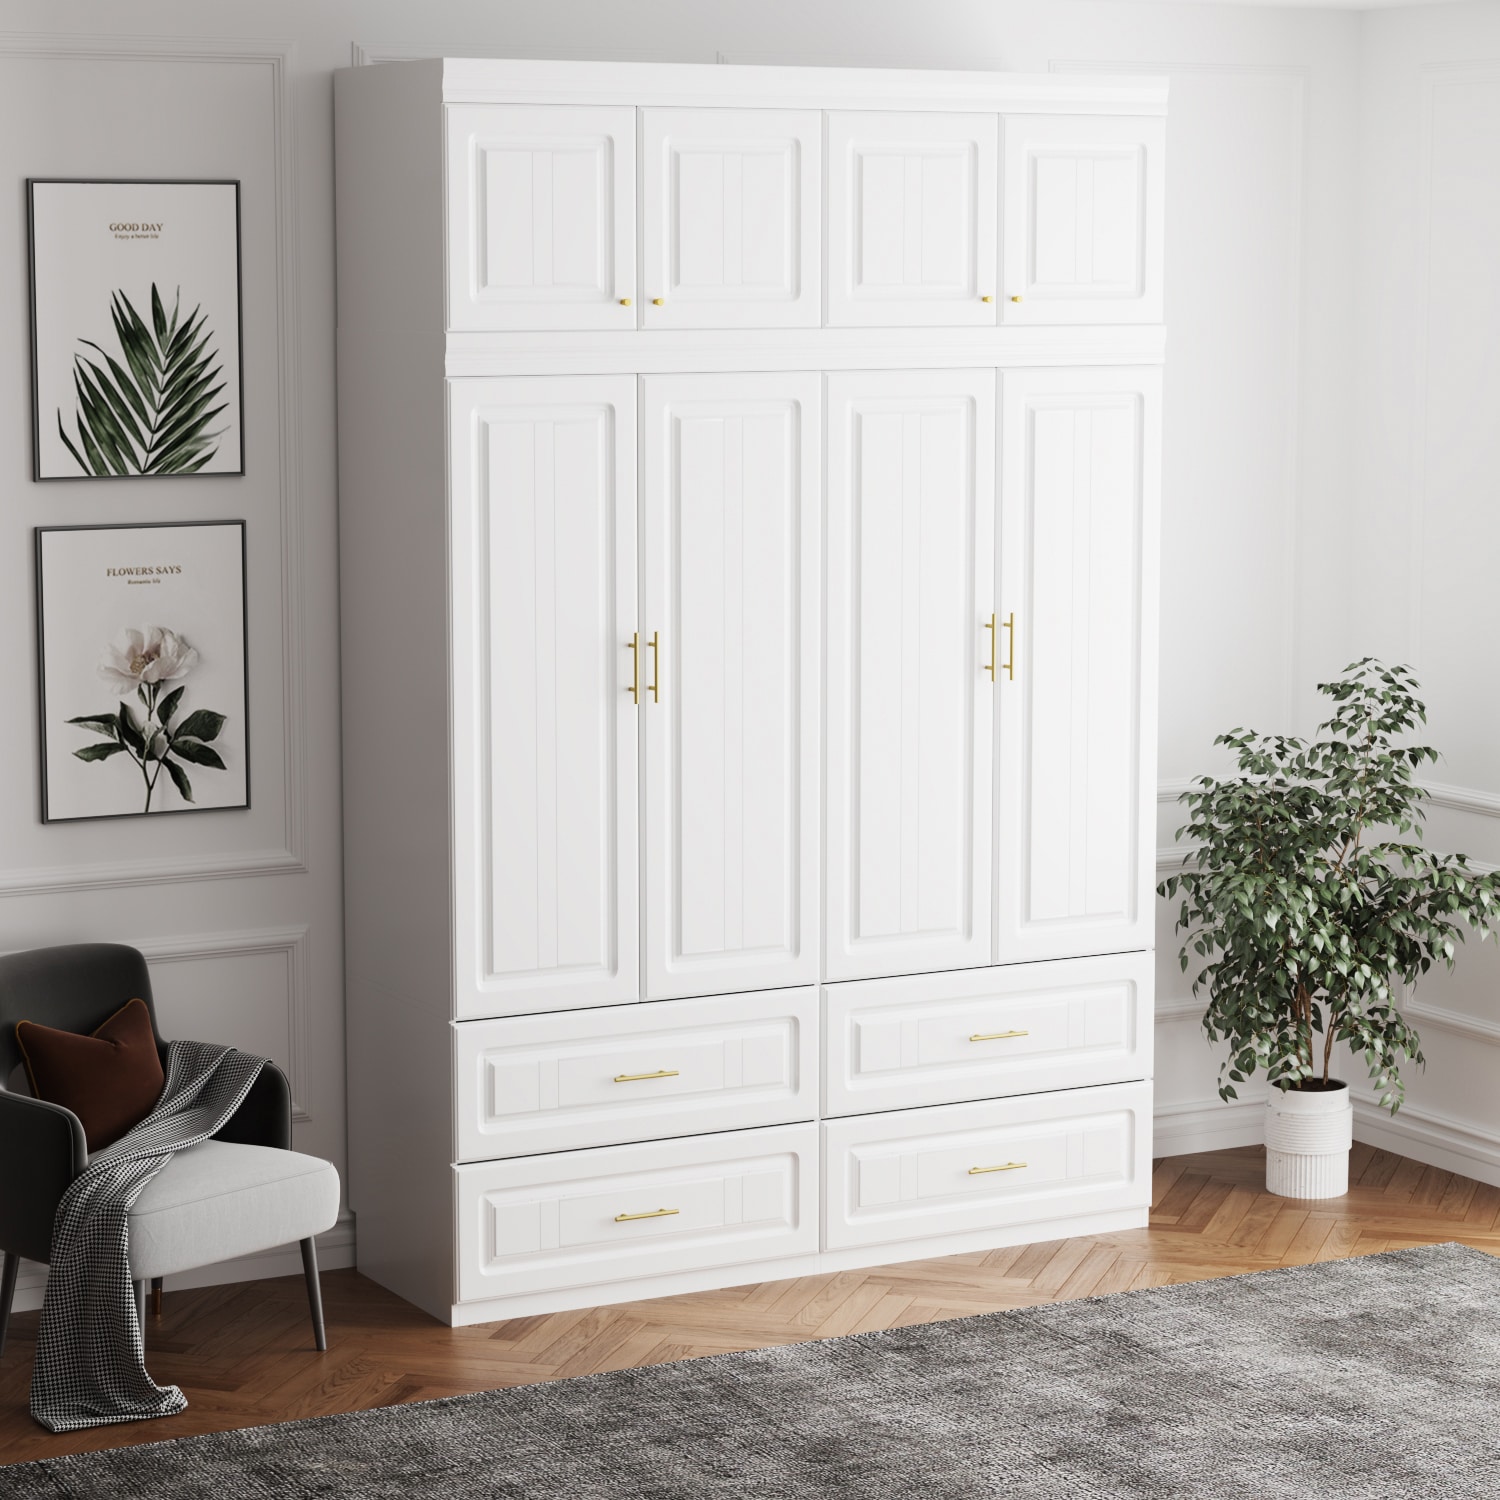 FUFU&GAGA Contemporary 4-Door Wardrobe with 4 Drawers and 5 Shelves ...